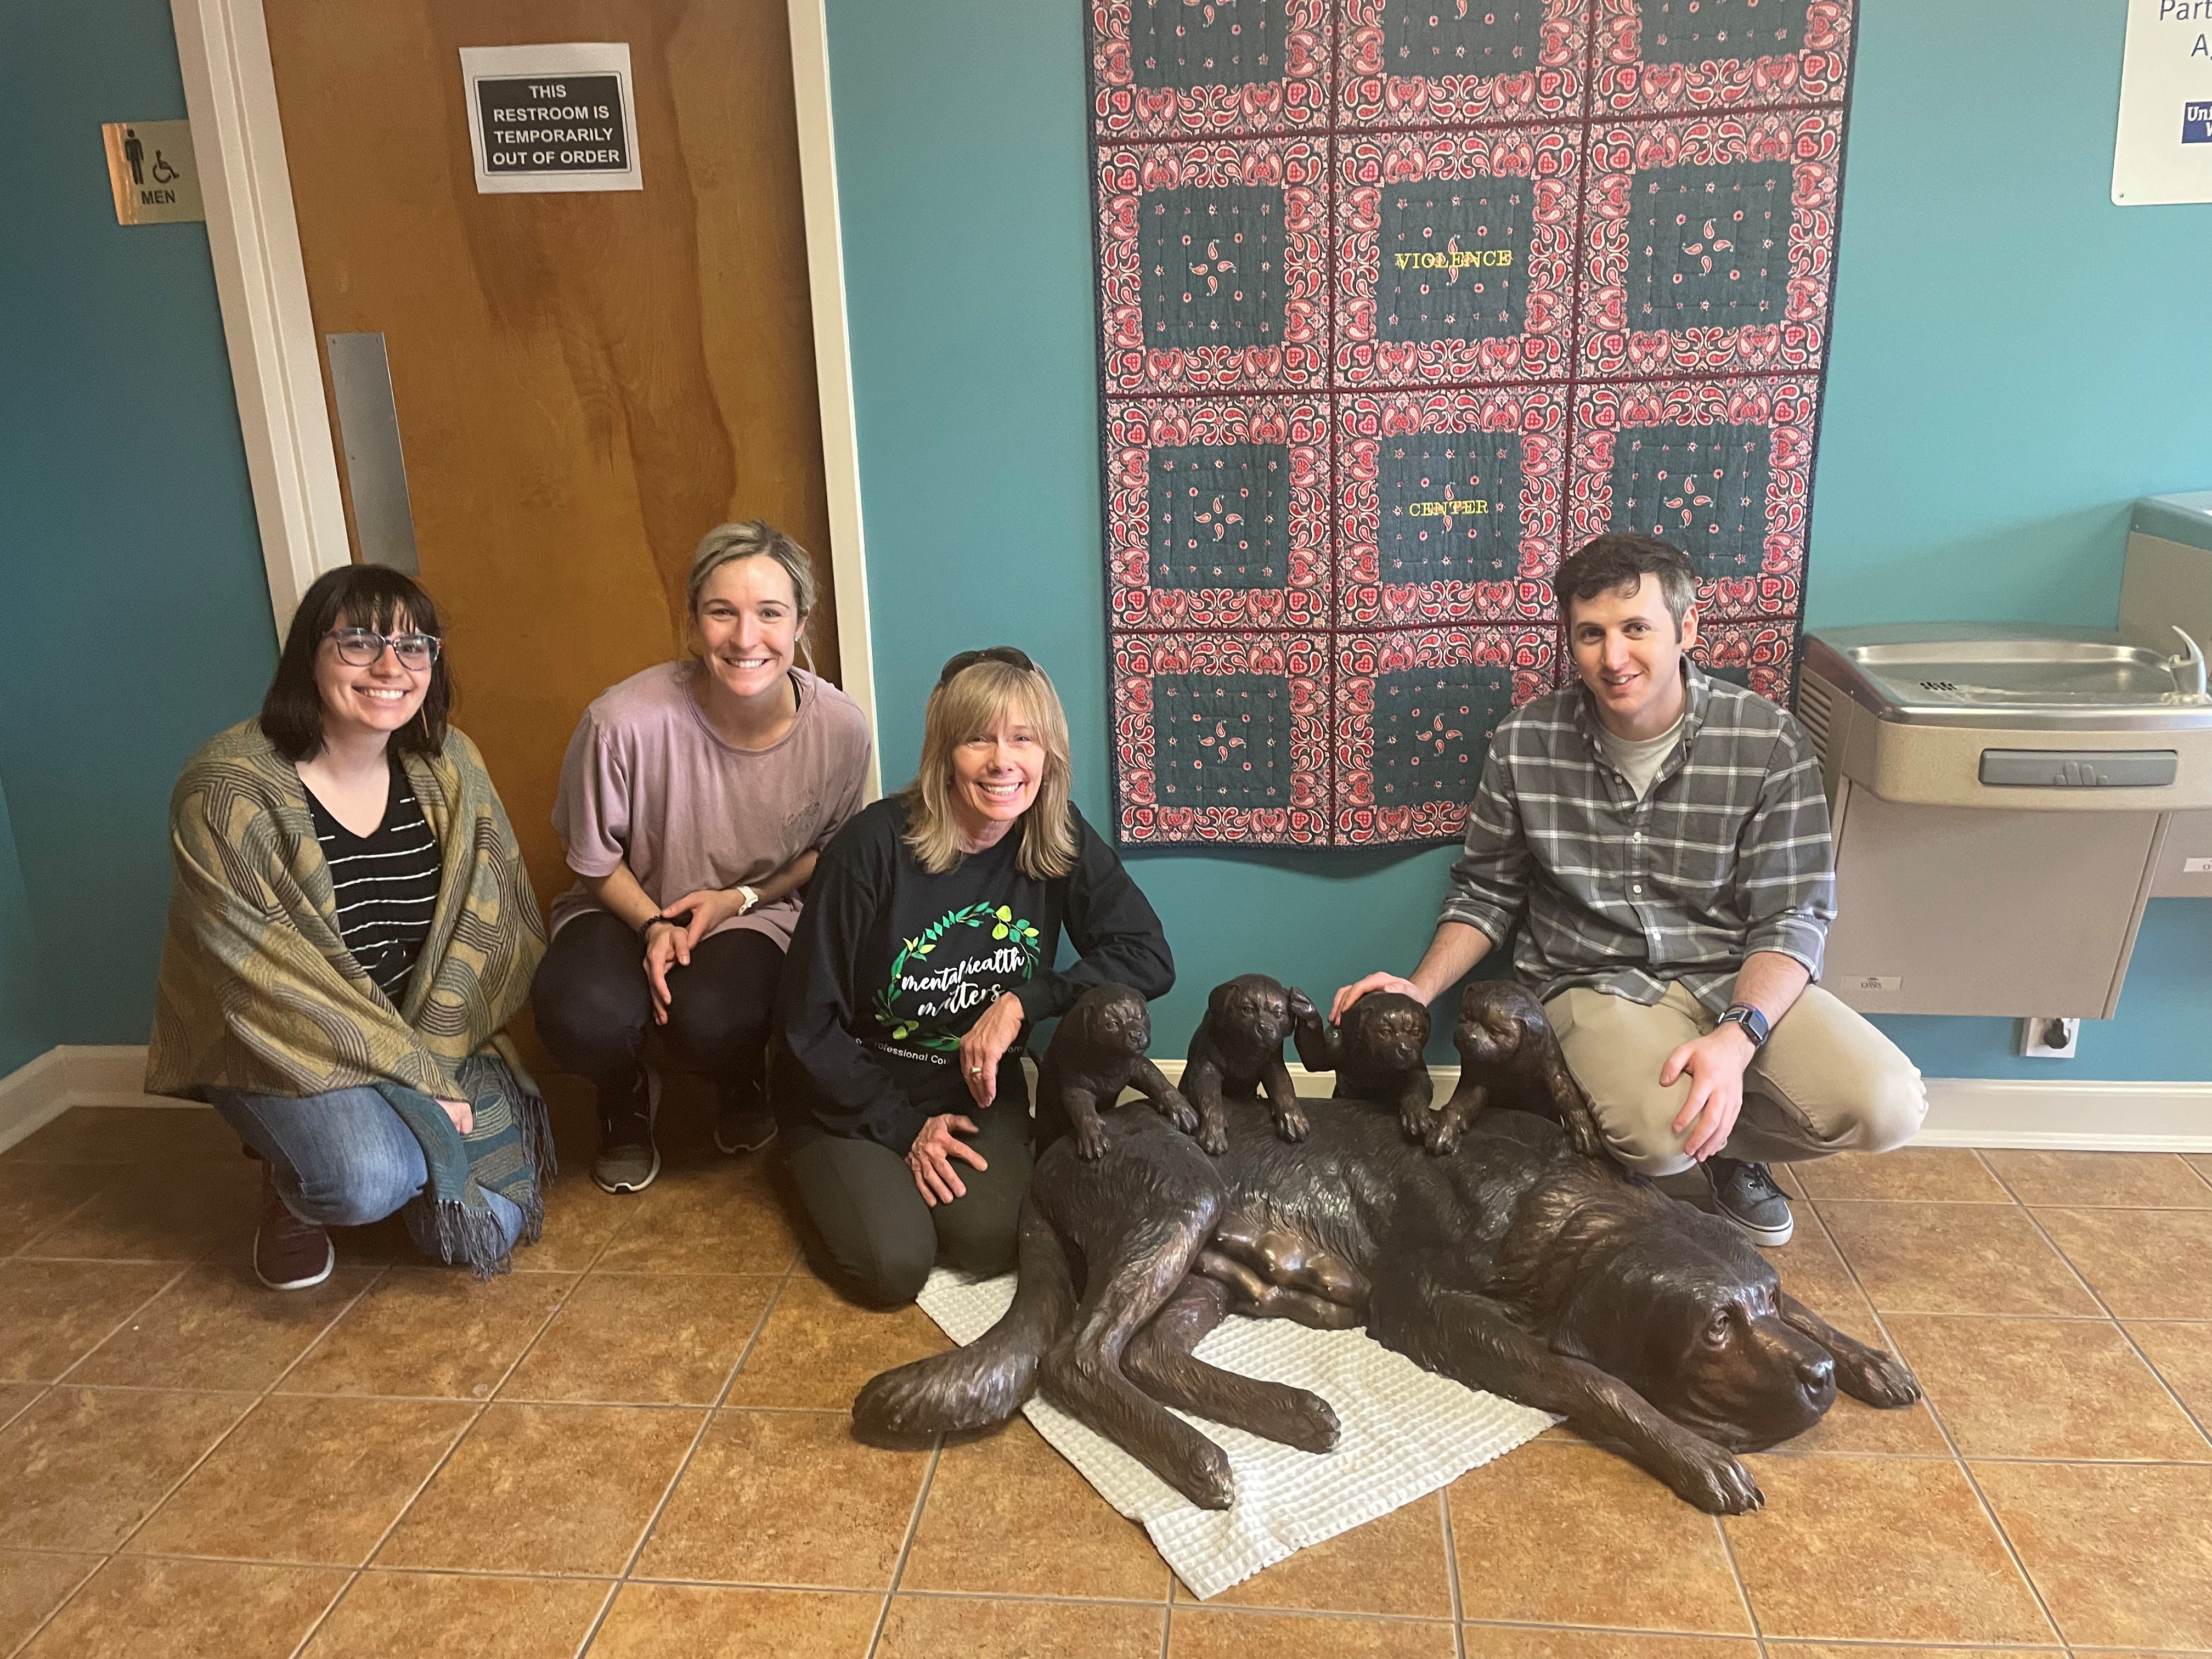 Group of member of Chi Sigma Iota posing next to bronze statue of dog with puppies